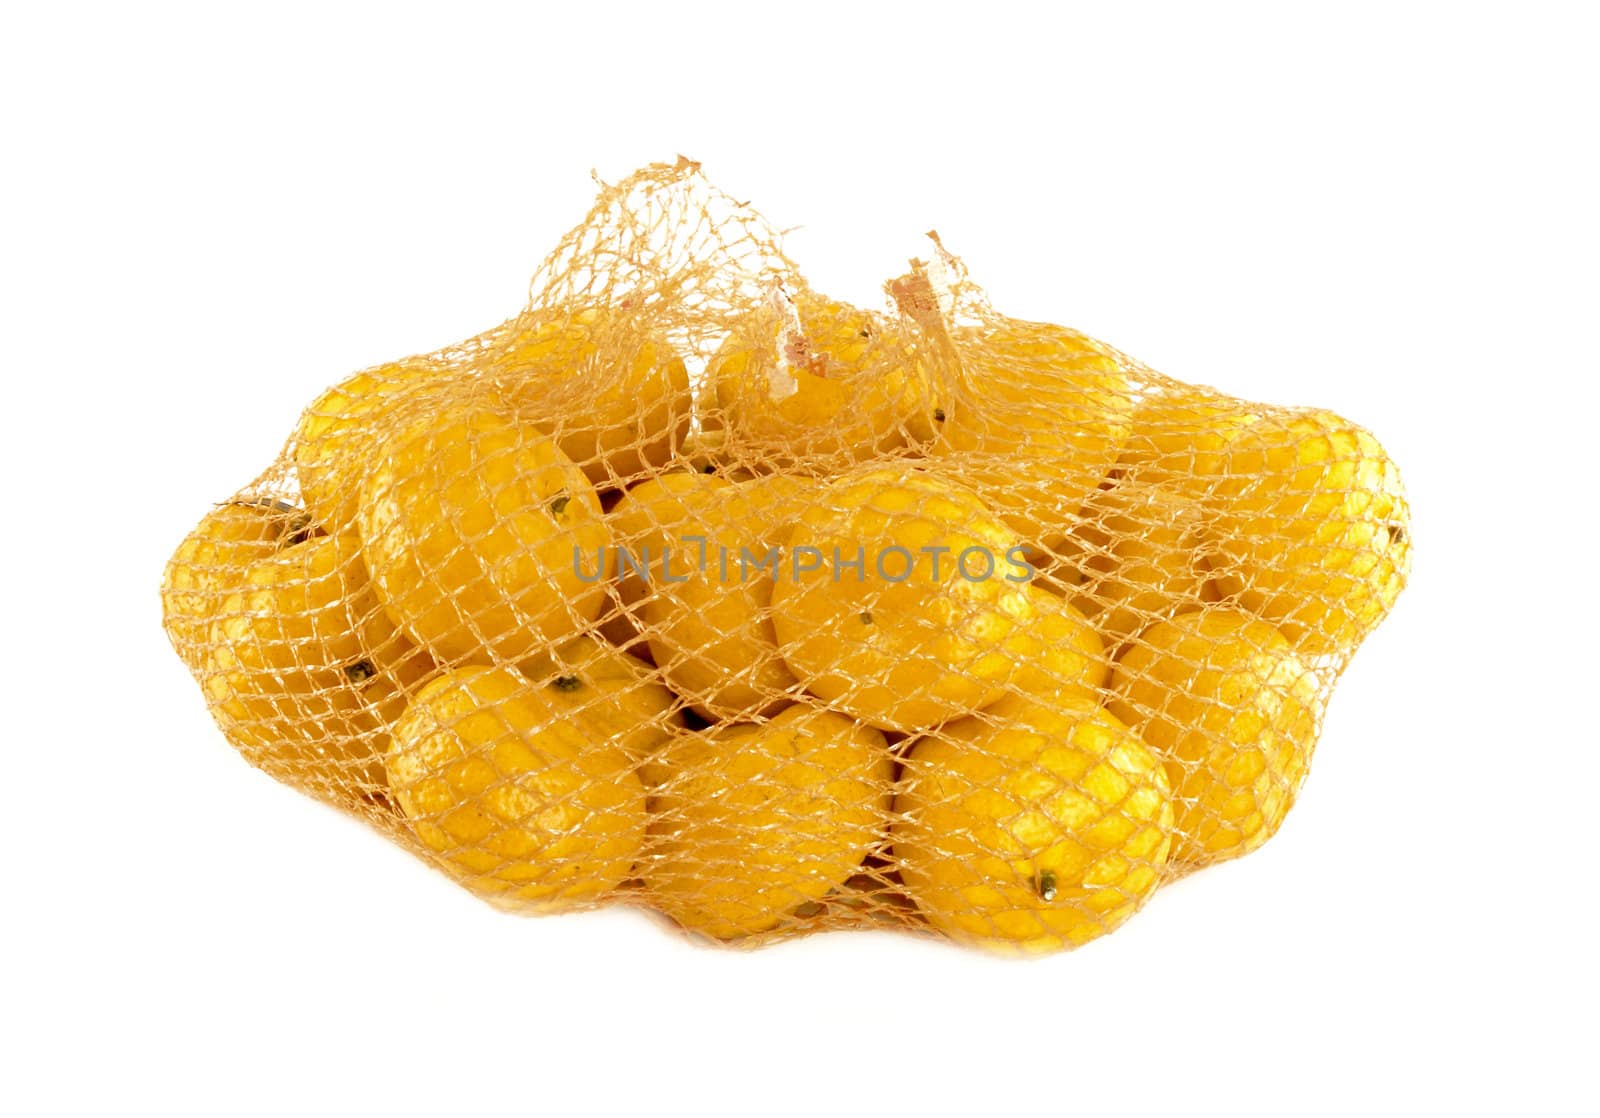 A bunch of oranges packaged in netting, isolated on white